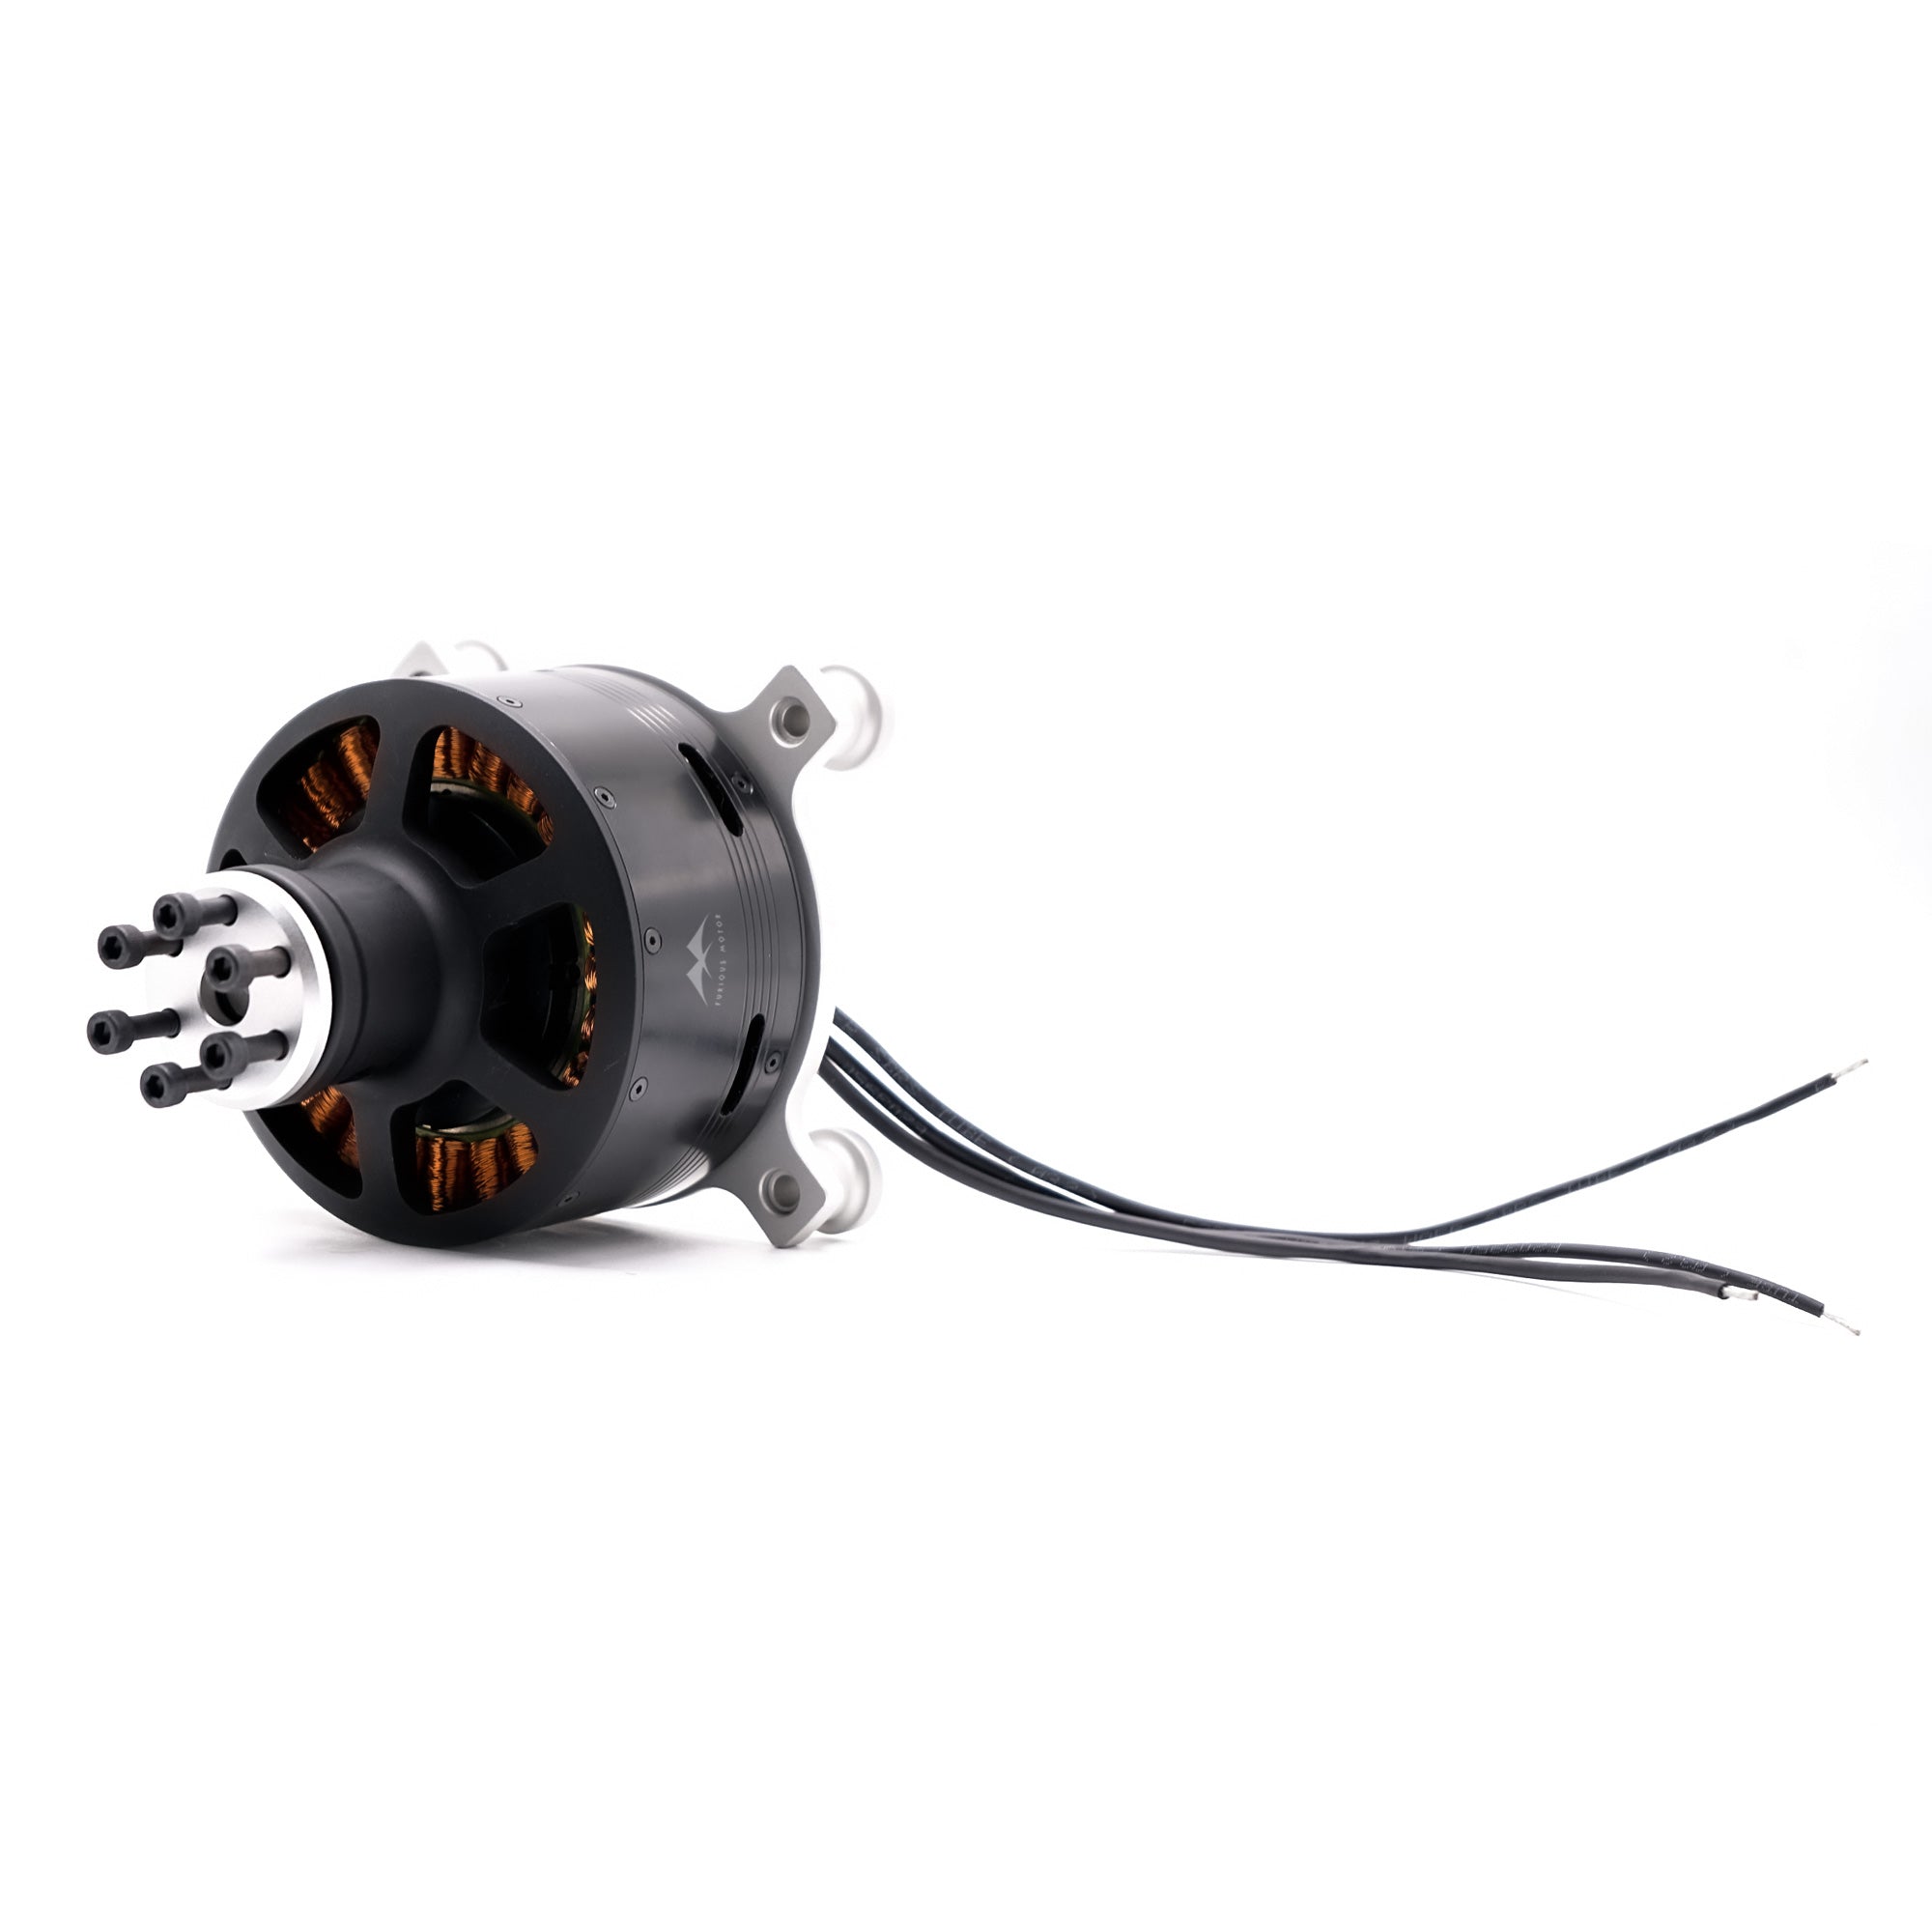 10850 25kg Thrust BLDC Motor with ESC and Propeller for Multi Rotor Drone